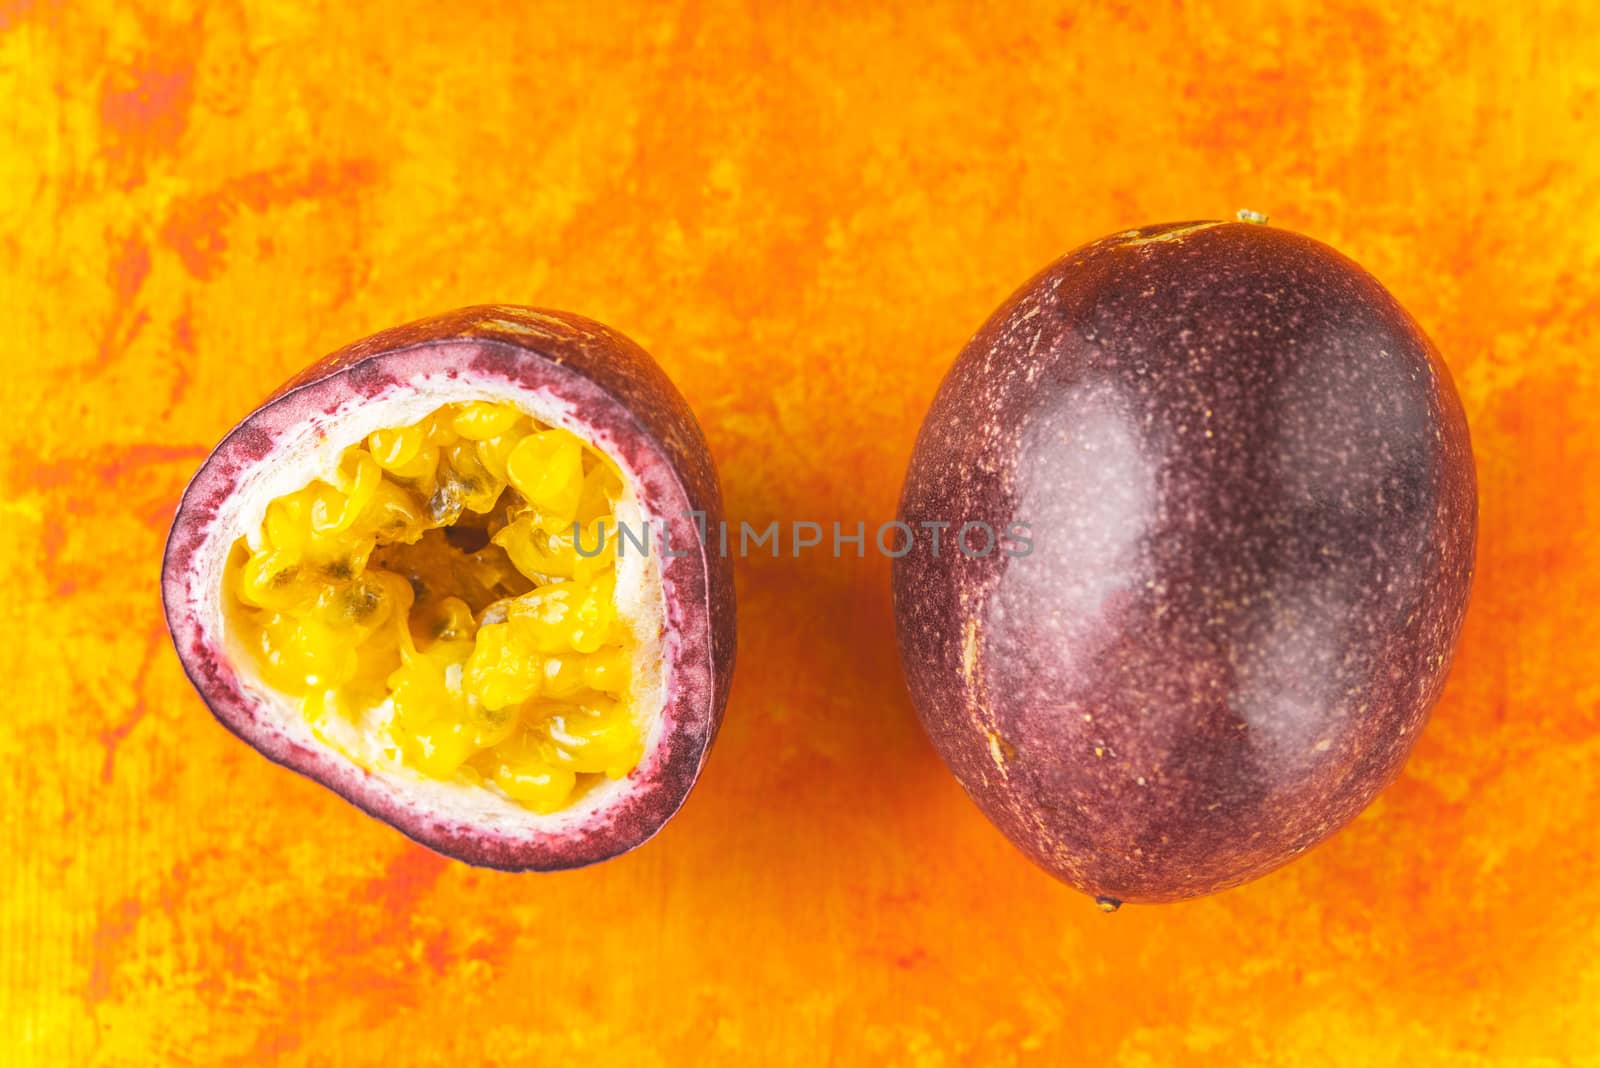 Passion fruit on the terracotta background top view by Deniskarpenkov